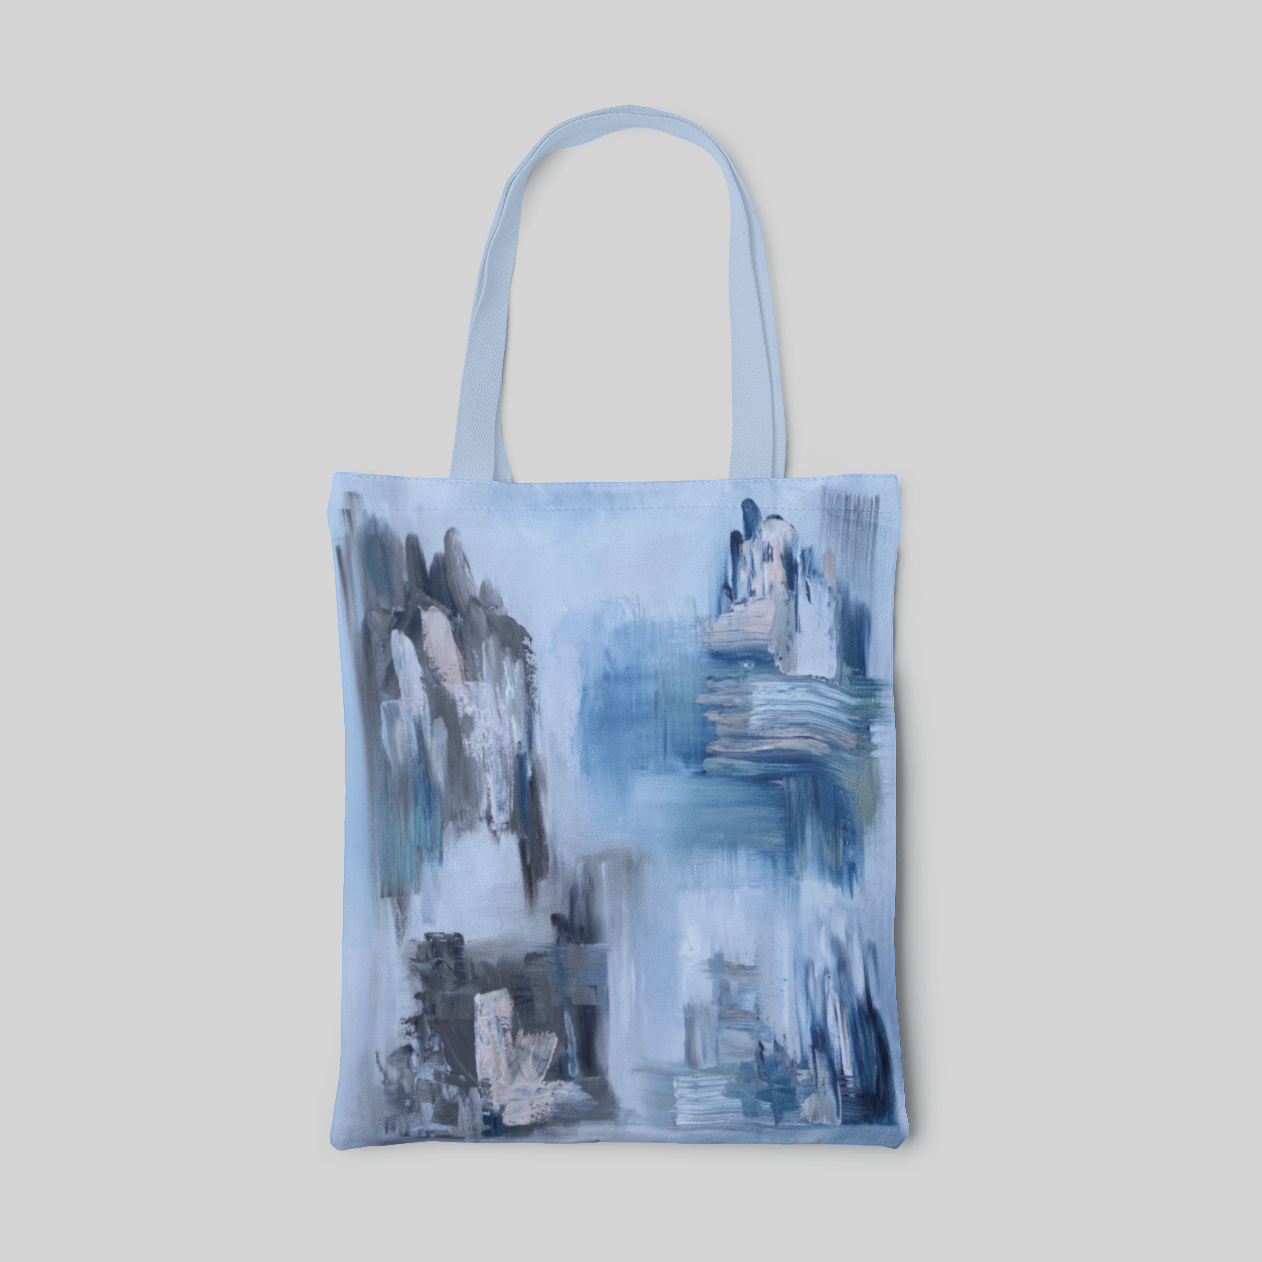 light blue abstract designed tote bag with different shades of blue and grey, front side